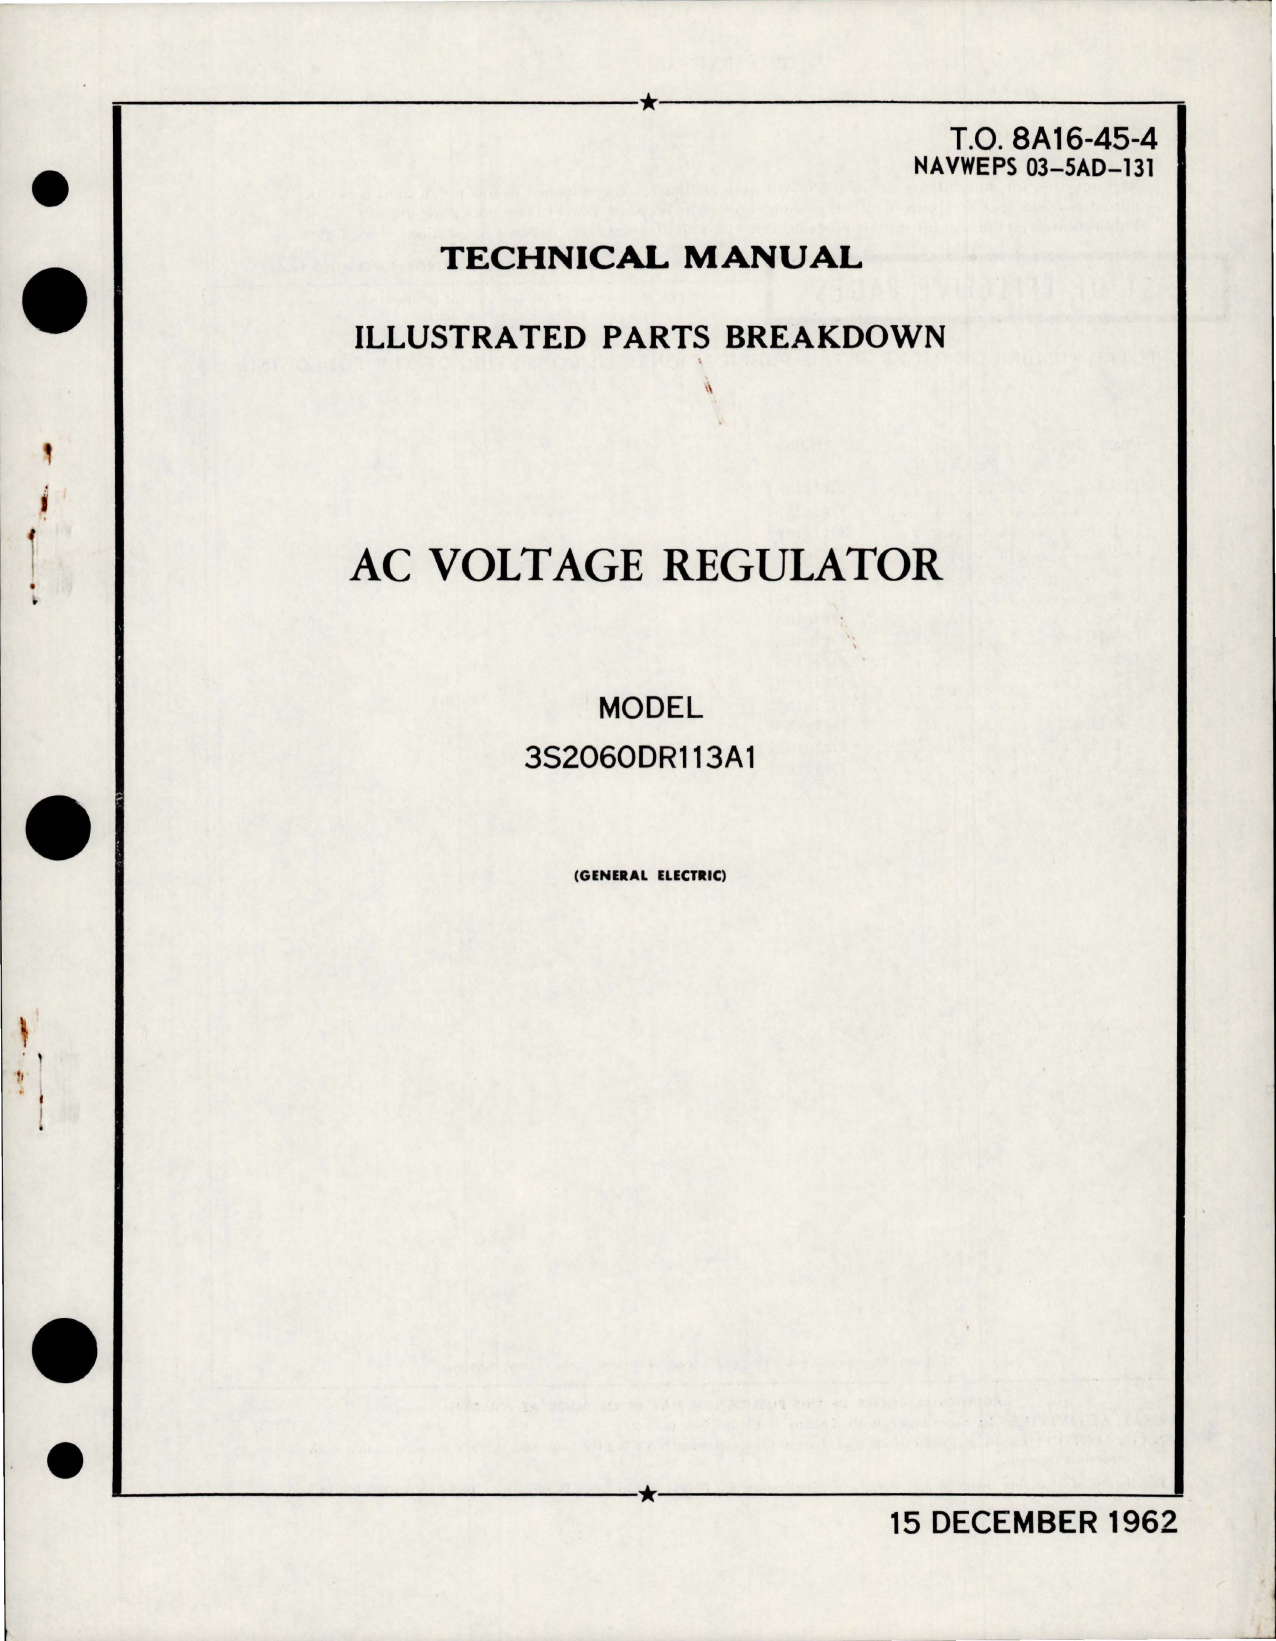 Sample page 1 from AirCorps Library document: Illustrated Parts Breakdown for AC Voltage Regulator - Model 3S2060DR113A1